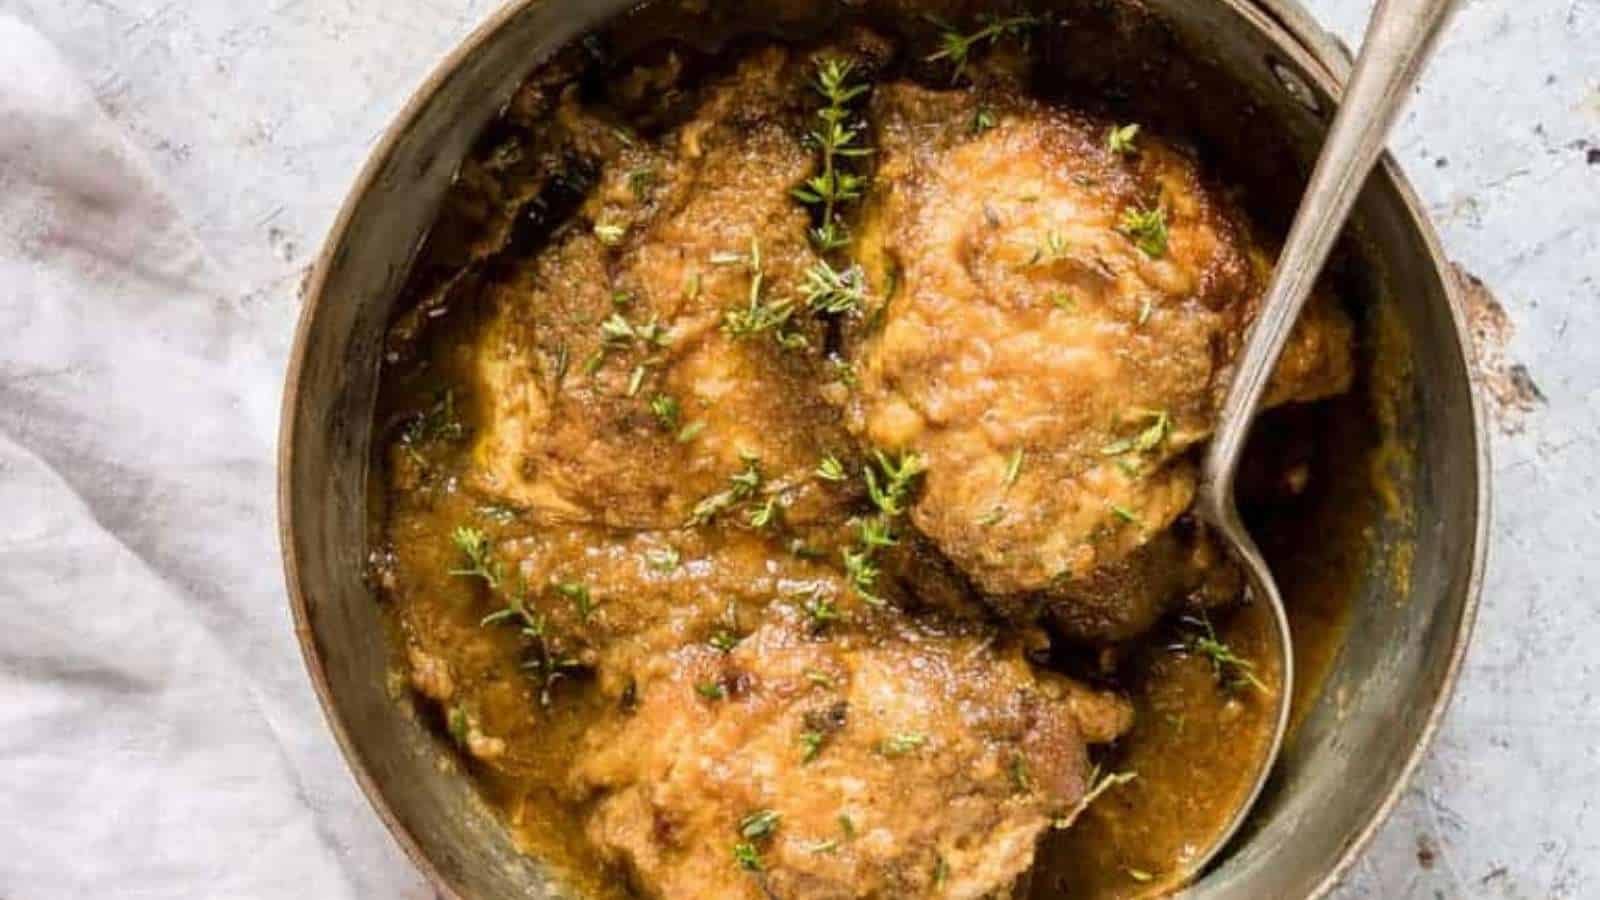 A bowl of chicken in a sauce with thyme sprigs.